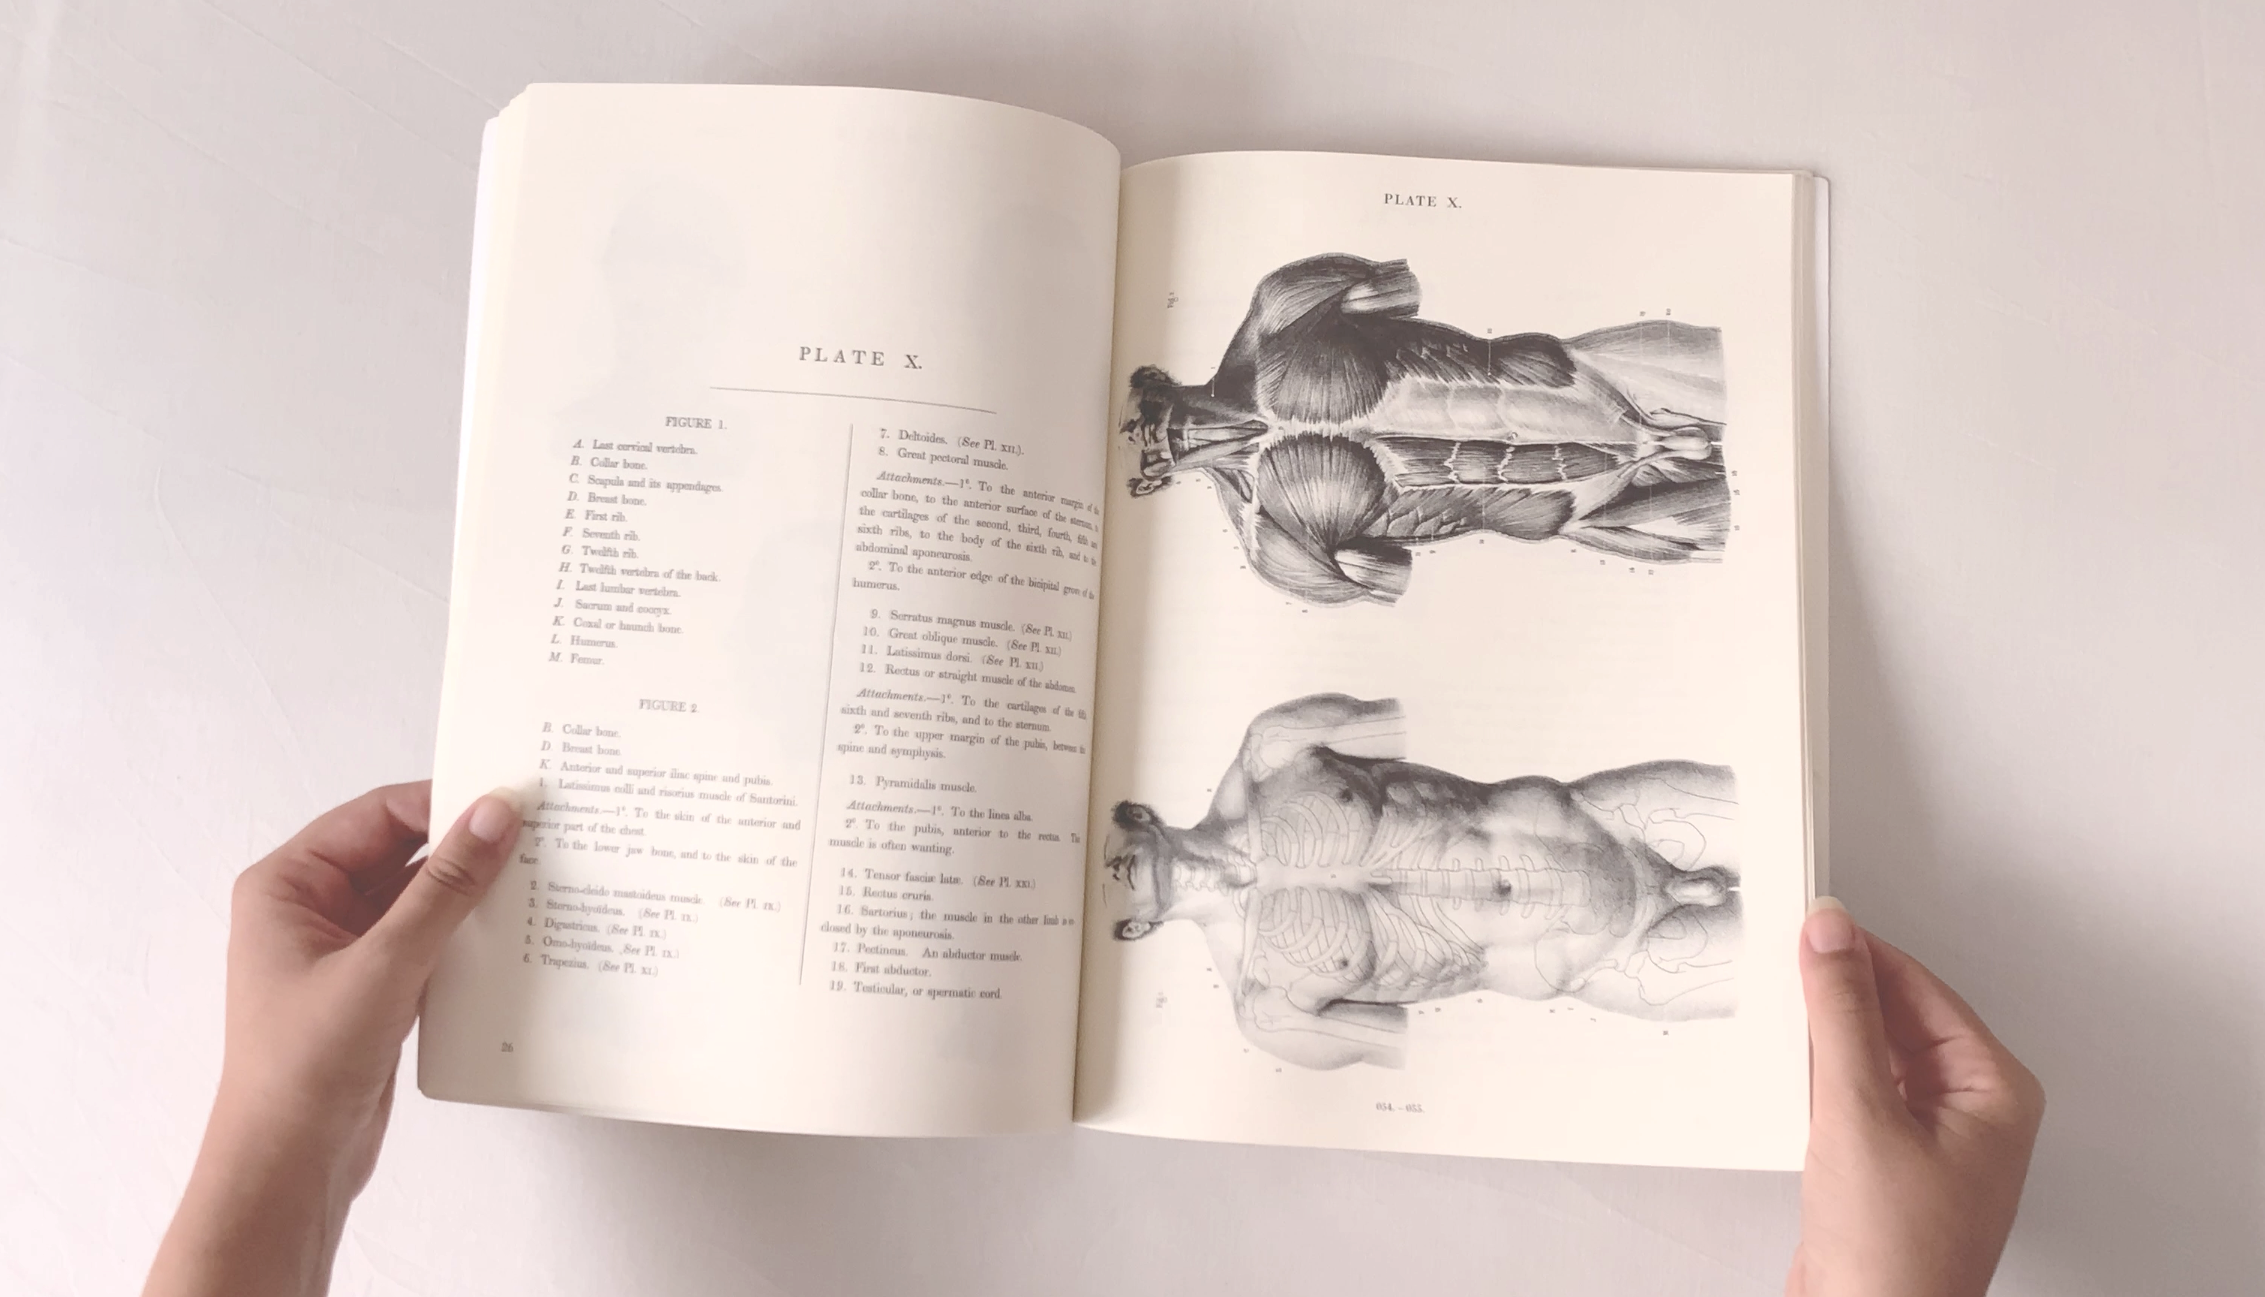 The best books on human anatomy for artists